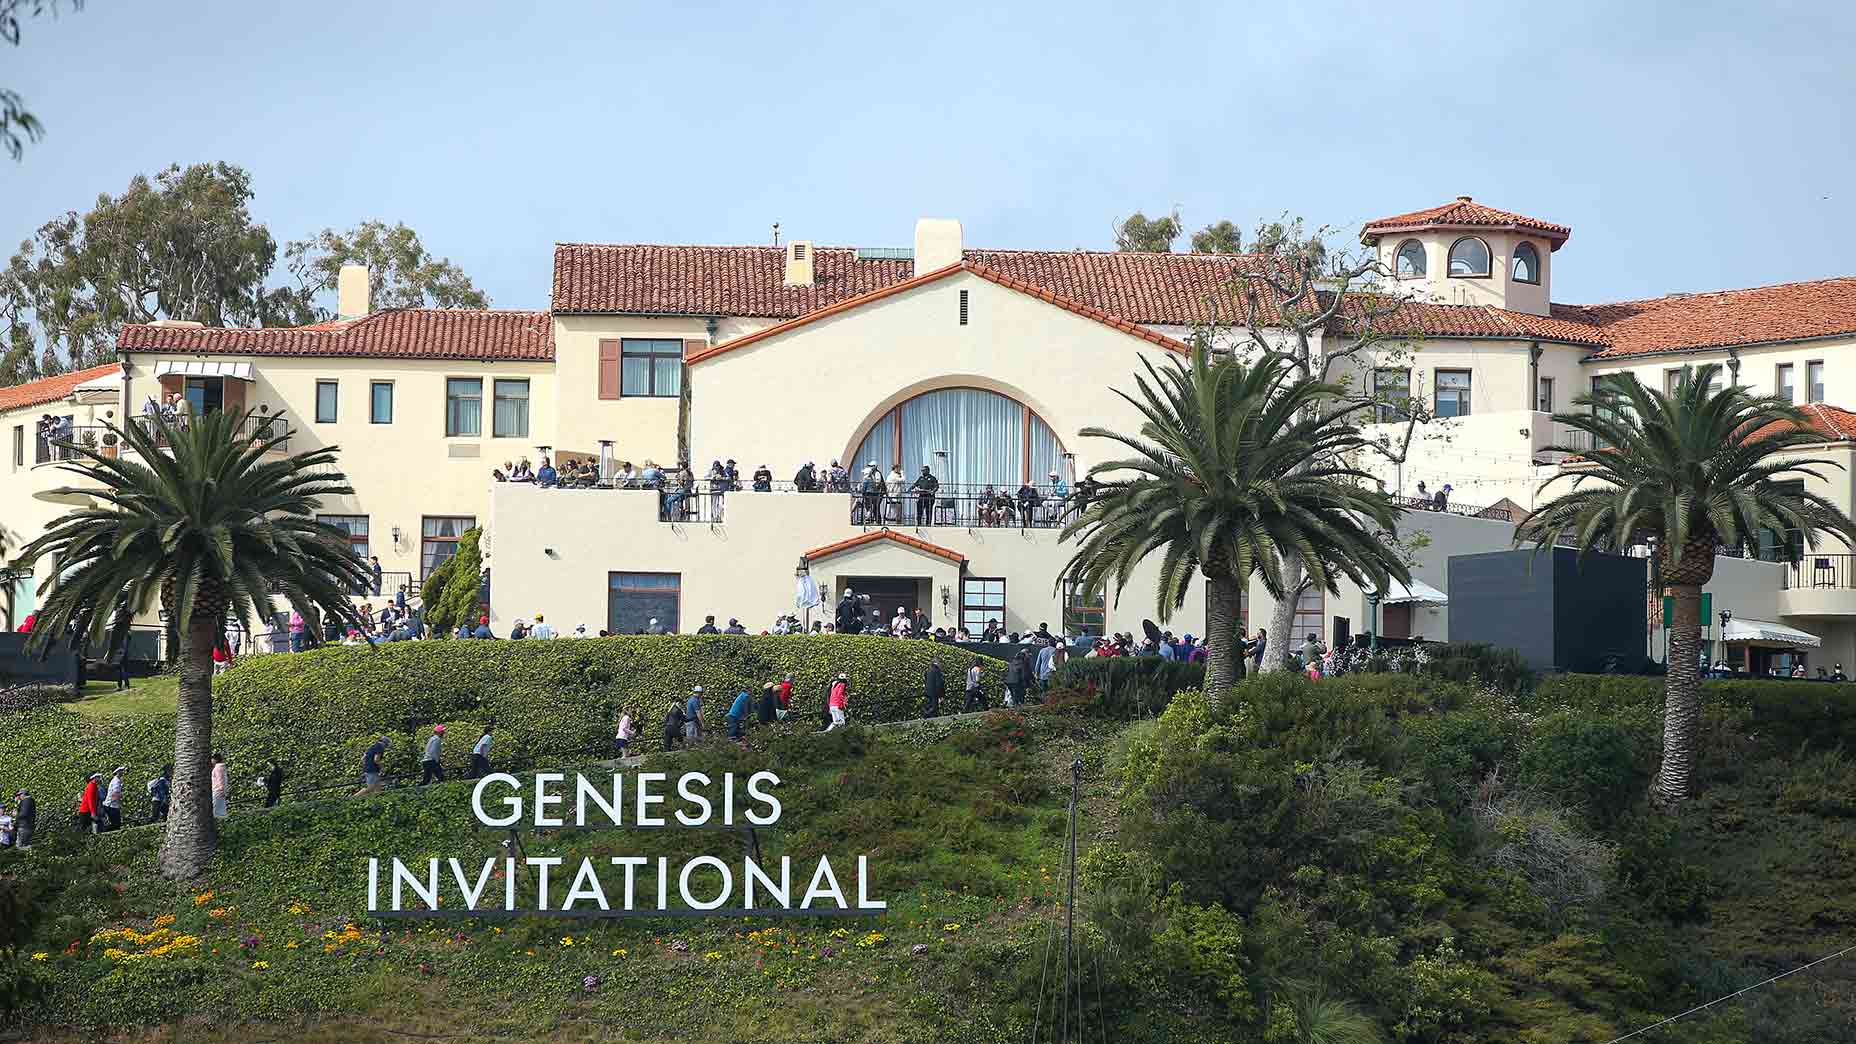 Genesis Invitational notebook dump! 8 things I saw at Riviera Country Club